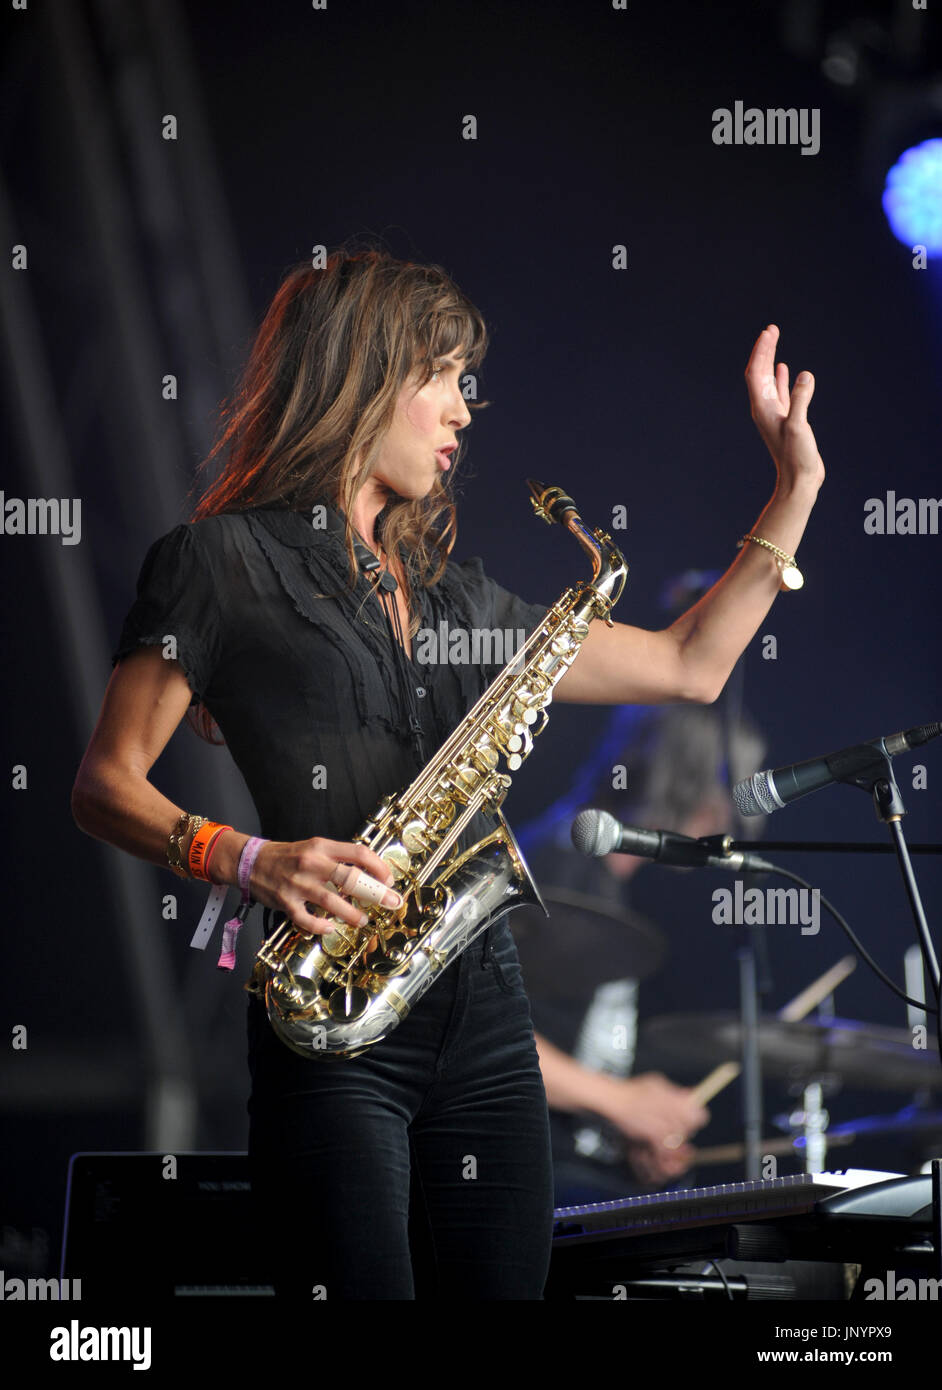 Lulworth Castle, Dorset, England. 30th July 2017.   Abi Harding, once of The Zutons, performs with English alternative rock band The Lightning Seeds  on The Castle Stage at the end of Camp Bestival 2017. © David Partridge / Alamy Live News Stock Photo